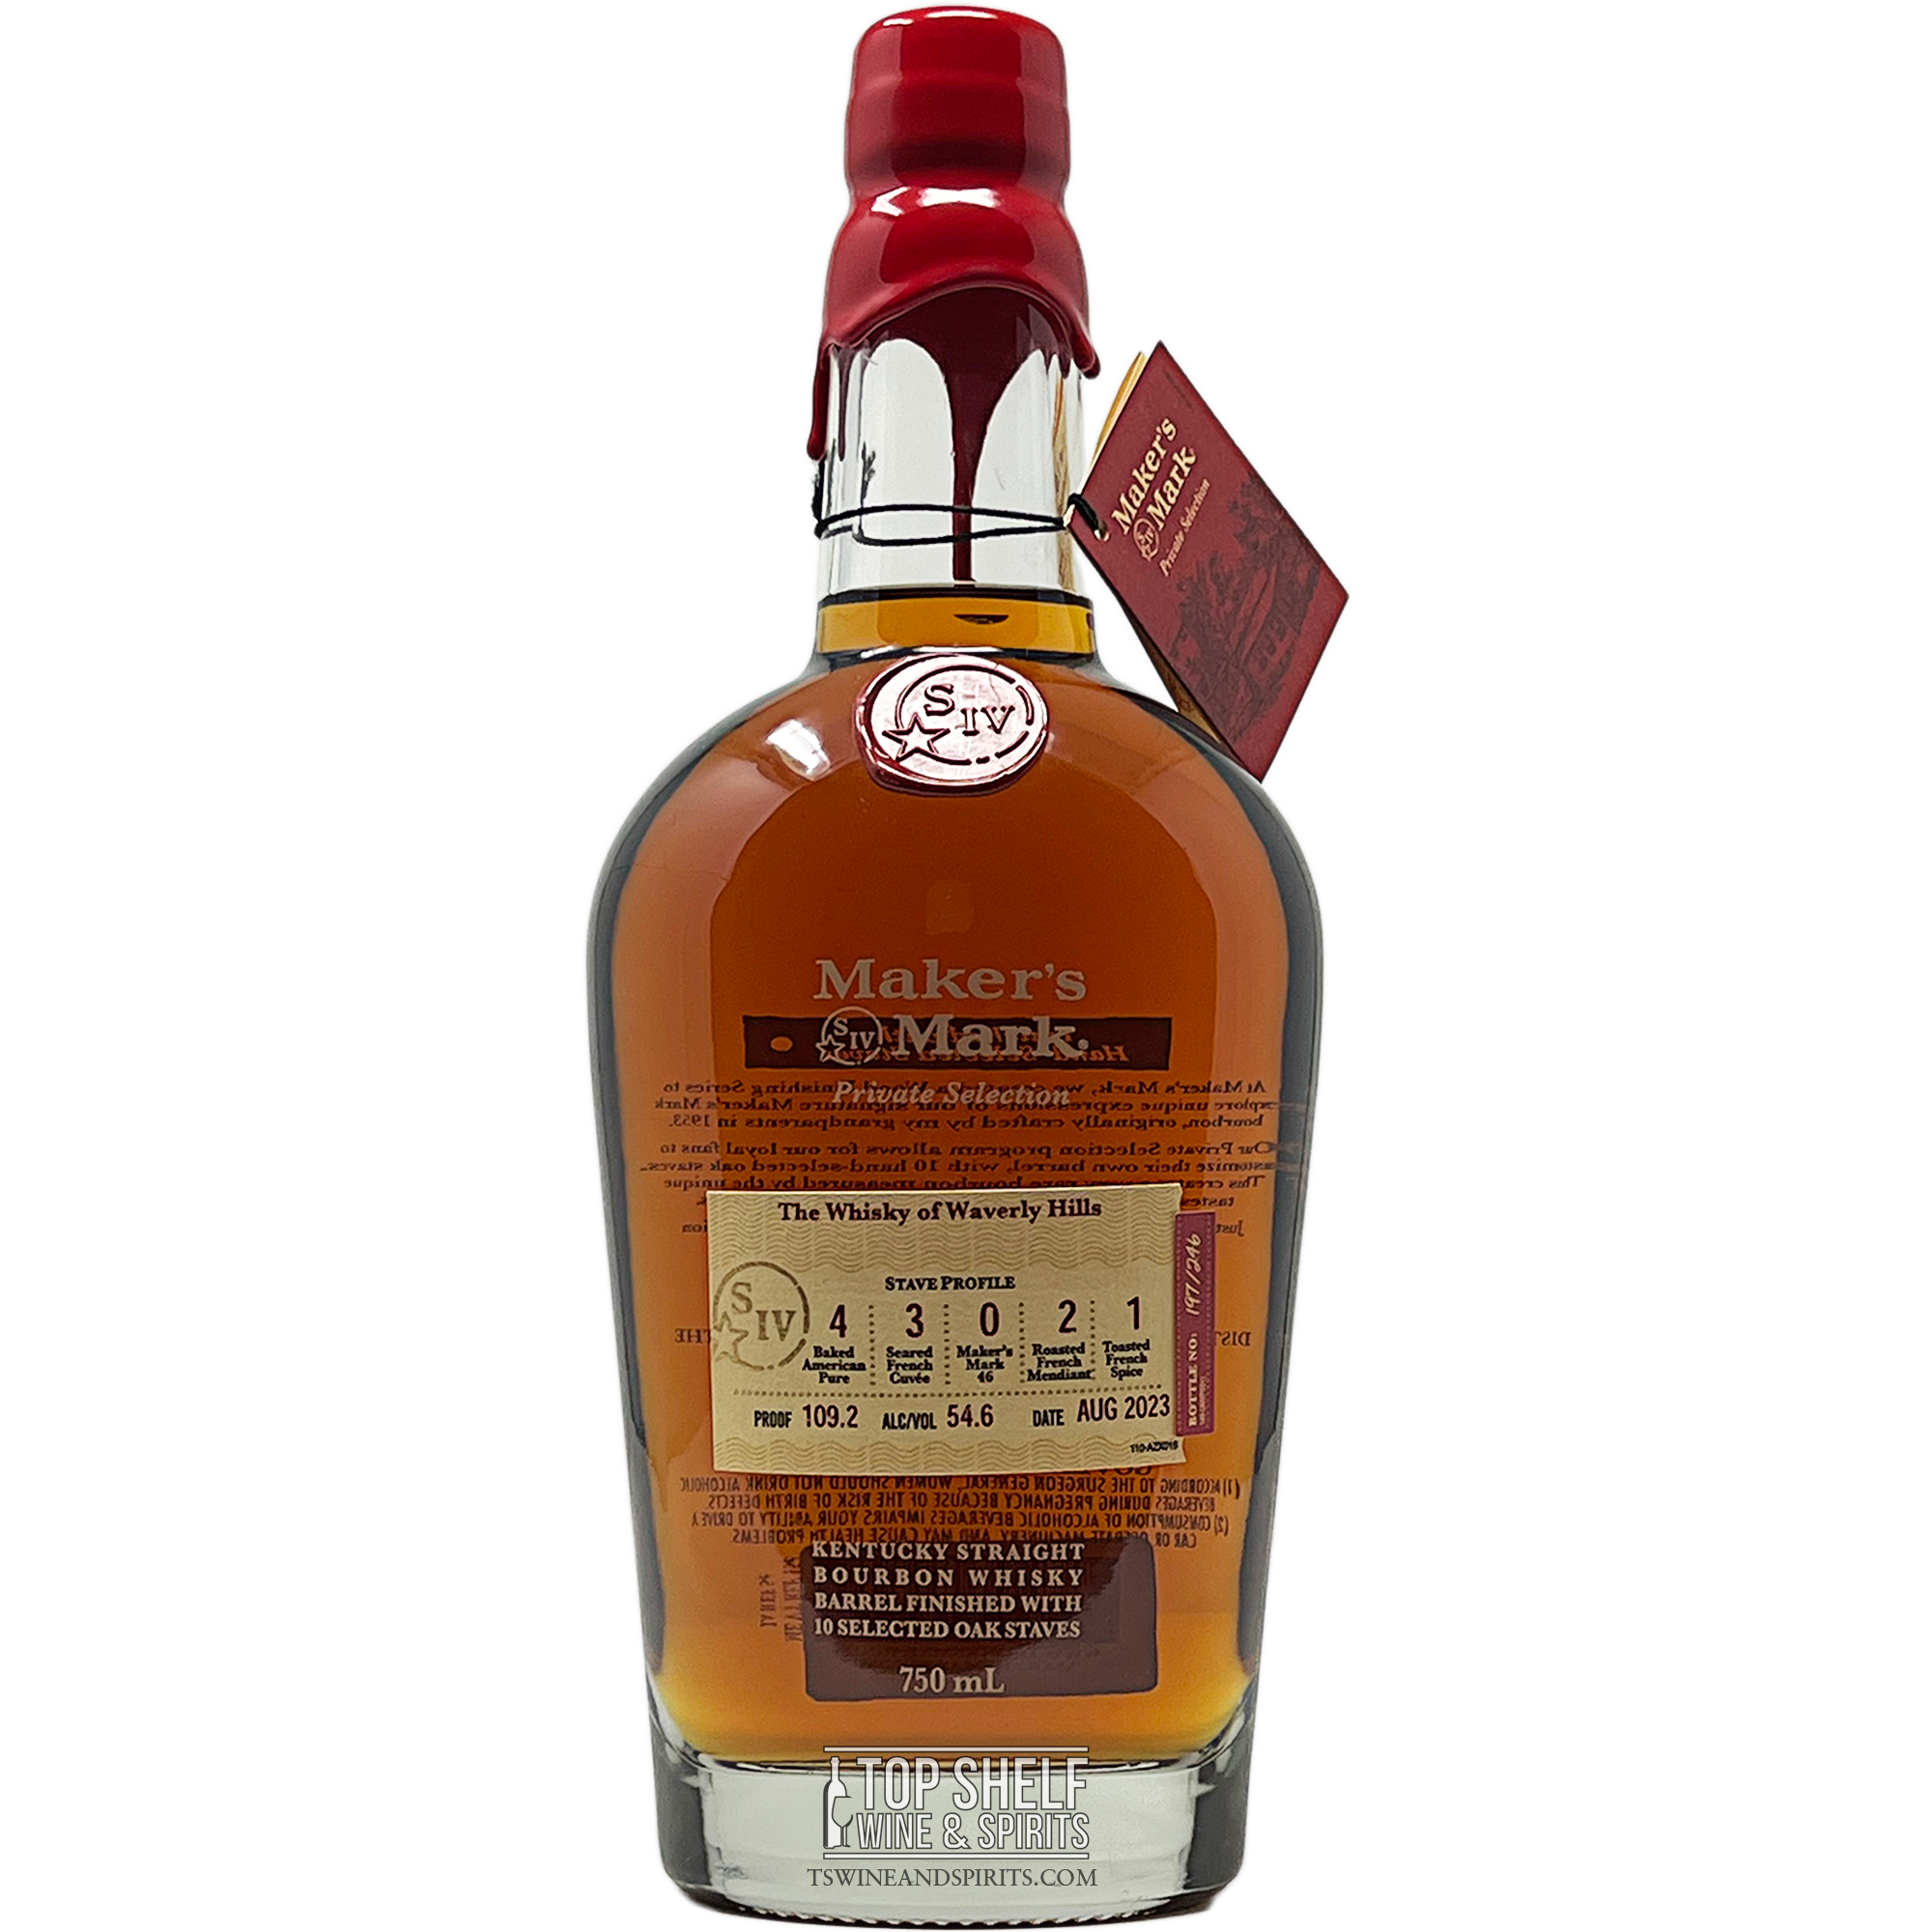 Maker's Mark Private Selection "The Whiskey of Waverly Hills" Bourbon (Private Selection)